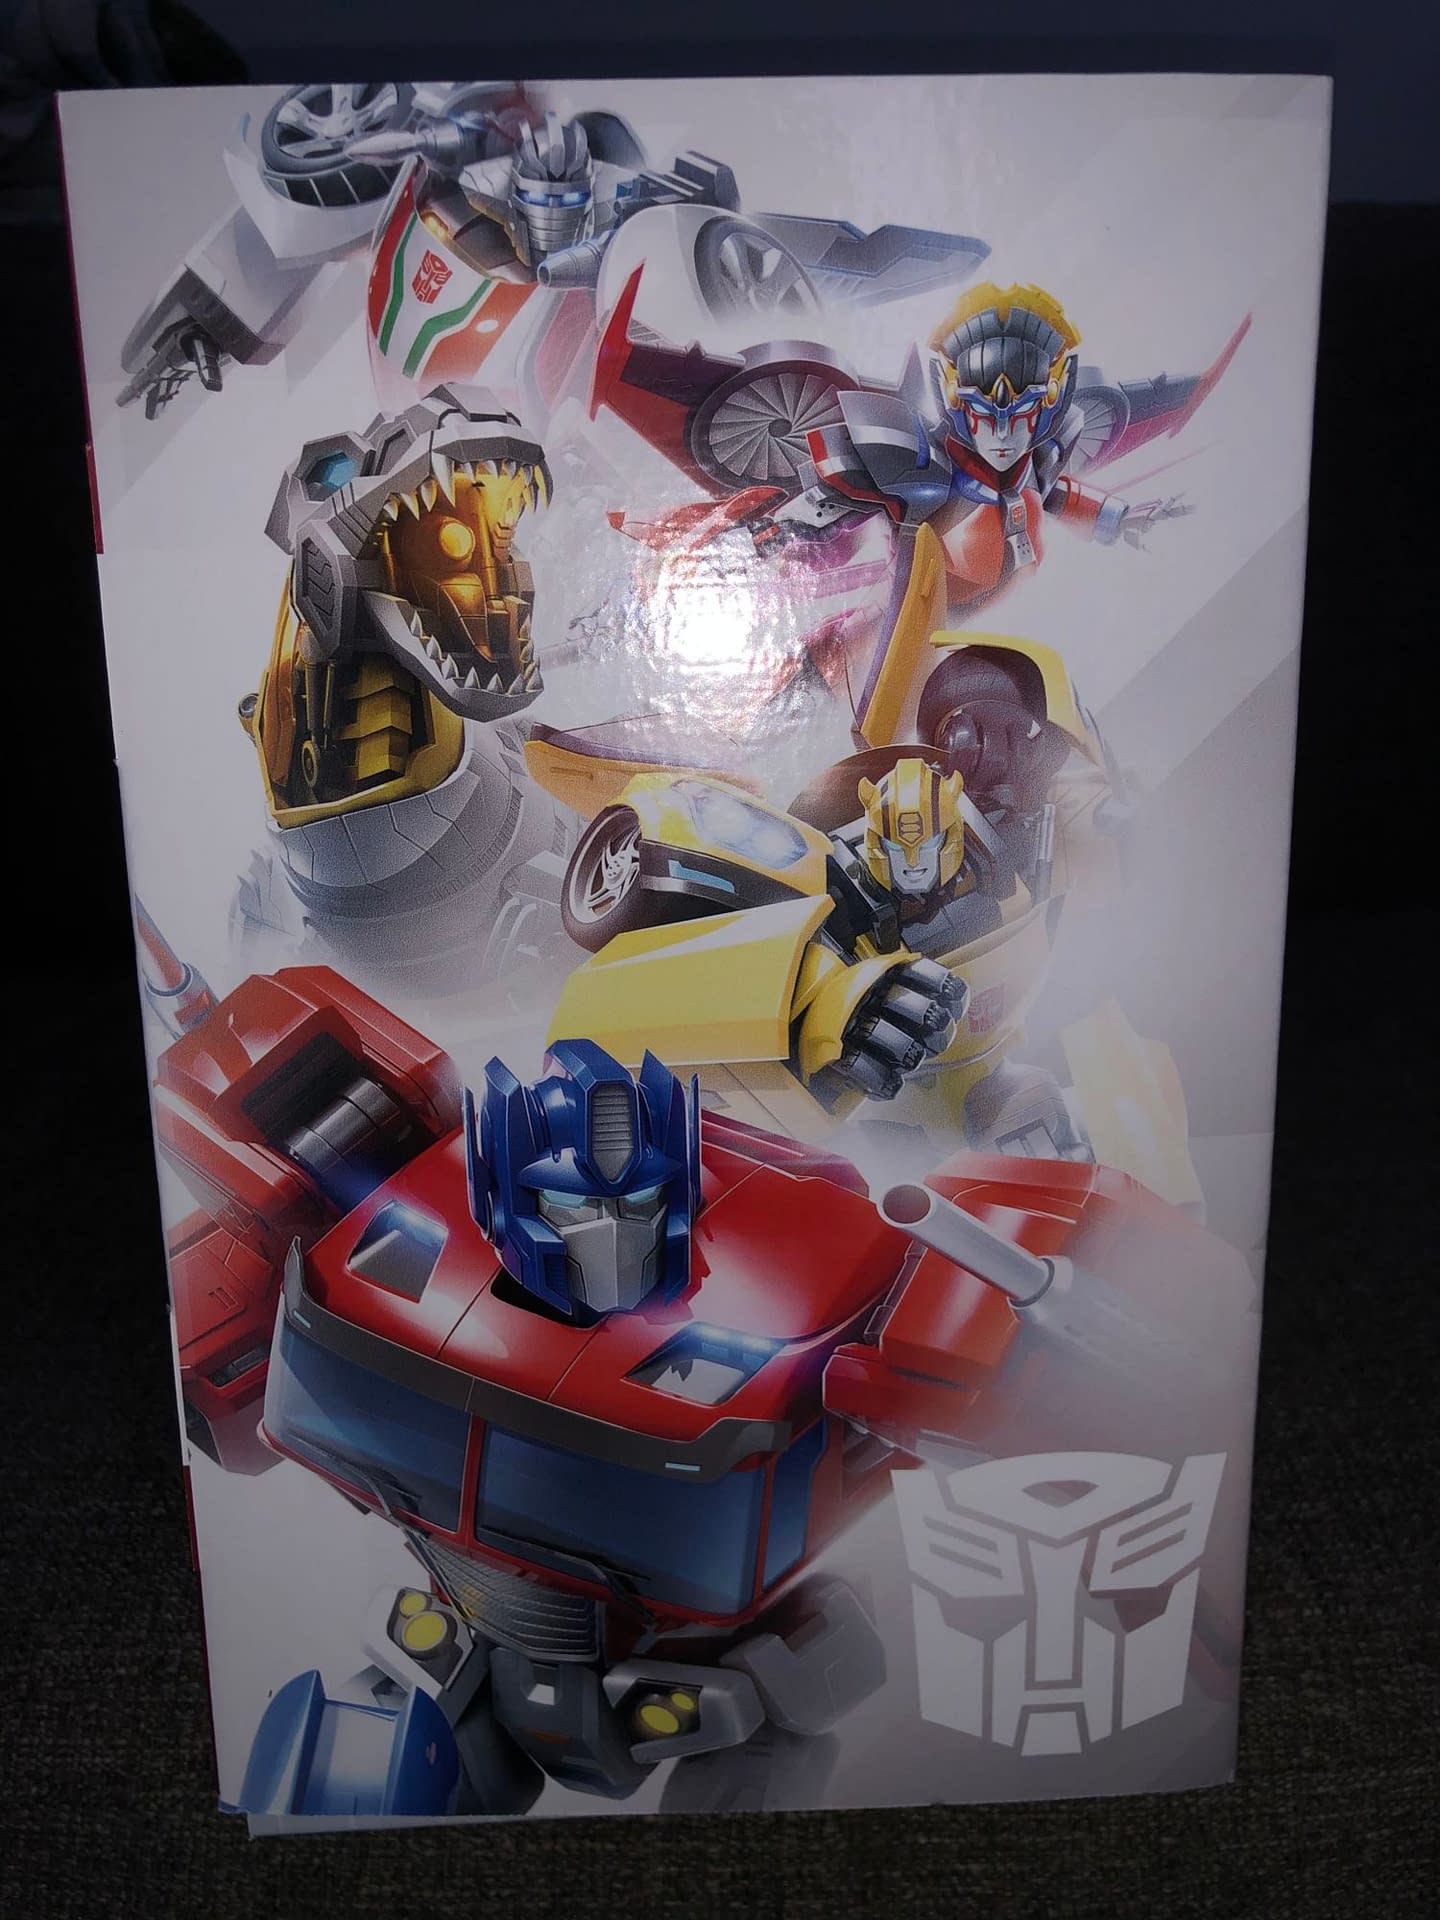 Transfromers 35th Anniversary Is Here Thanks to Hasbro